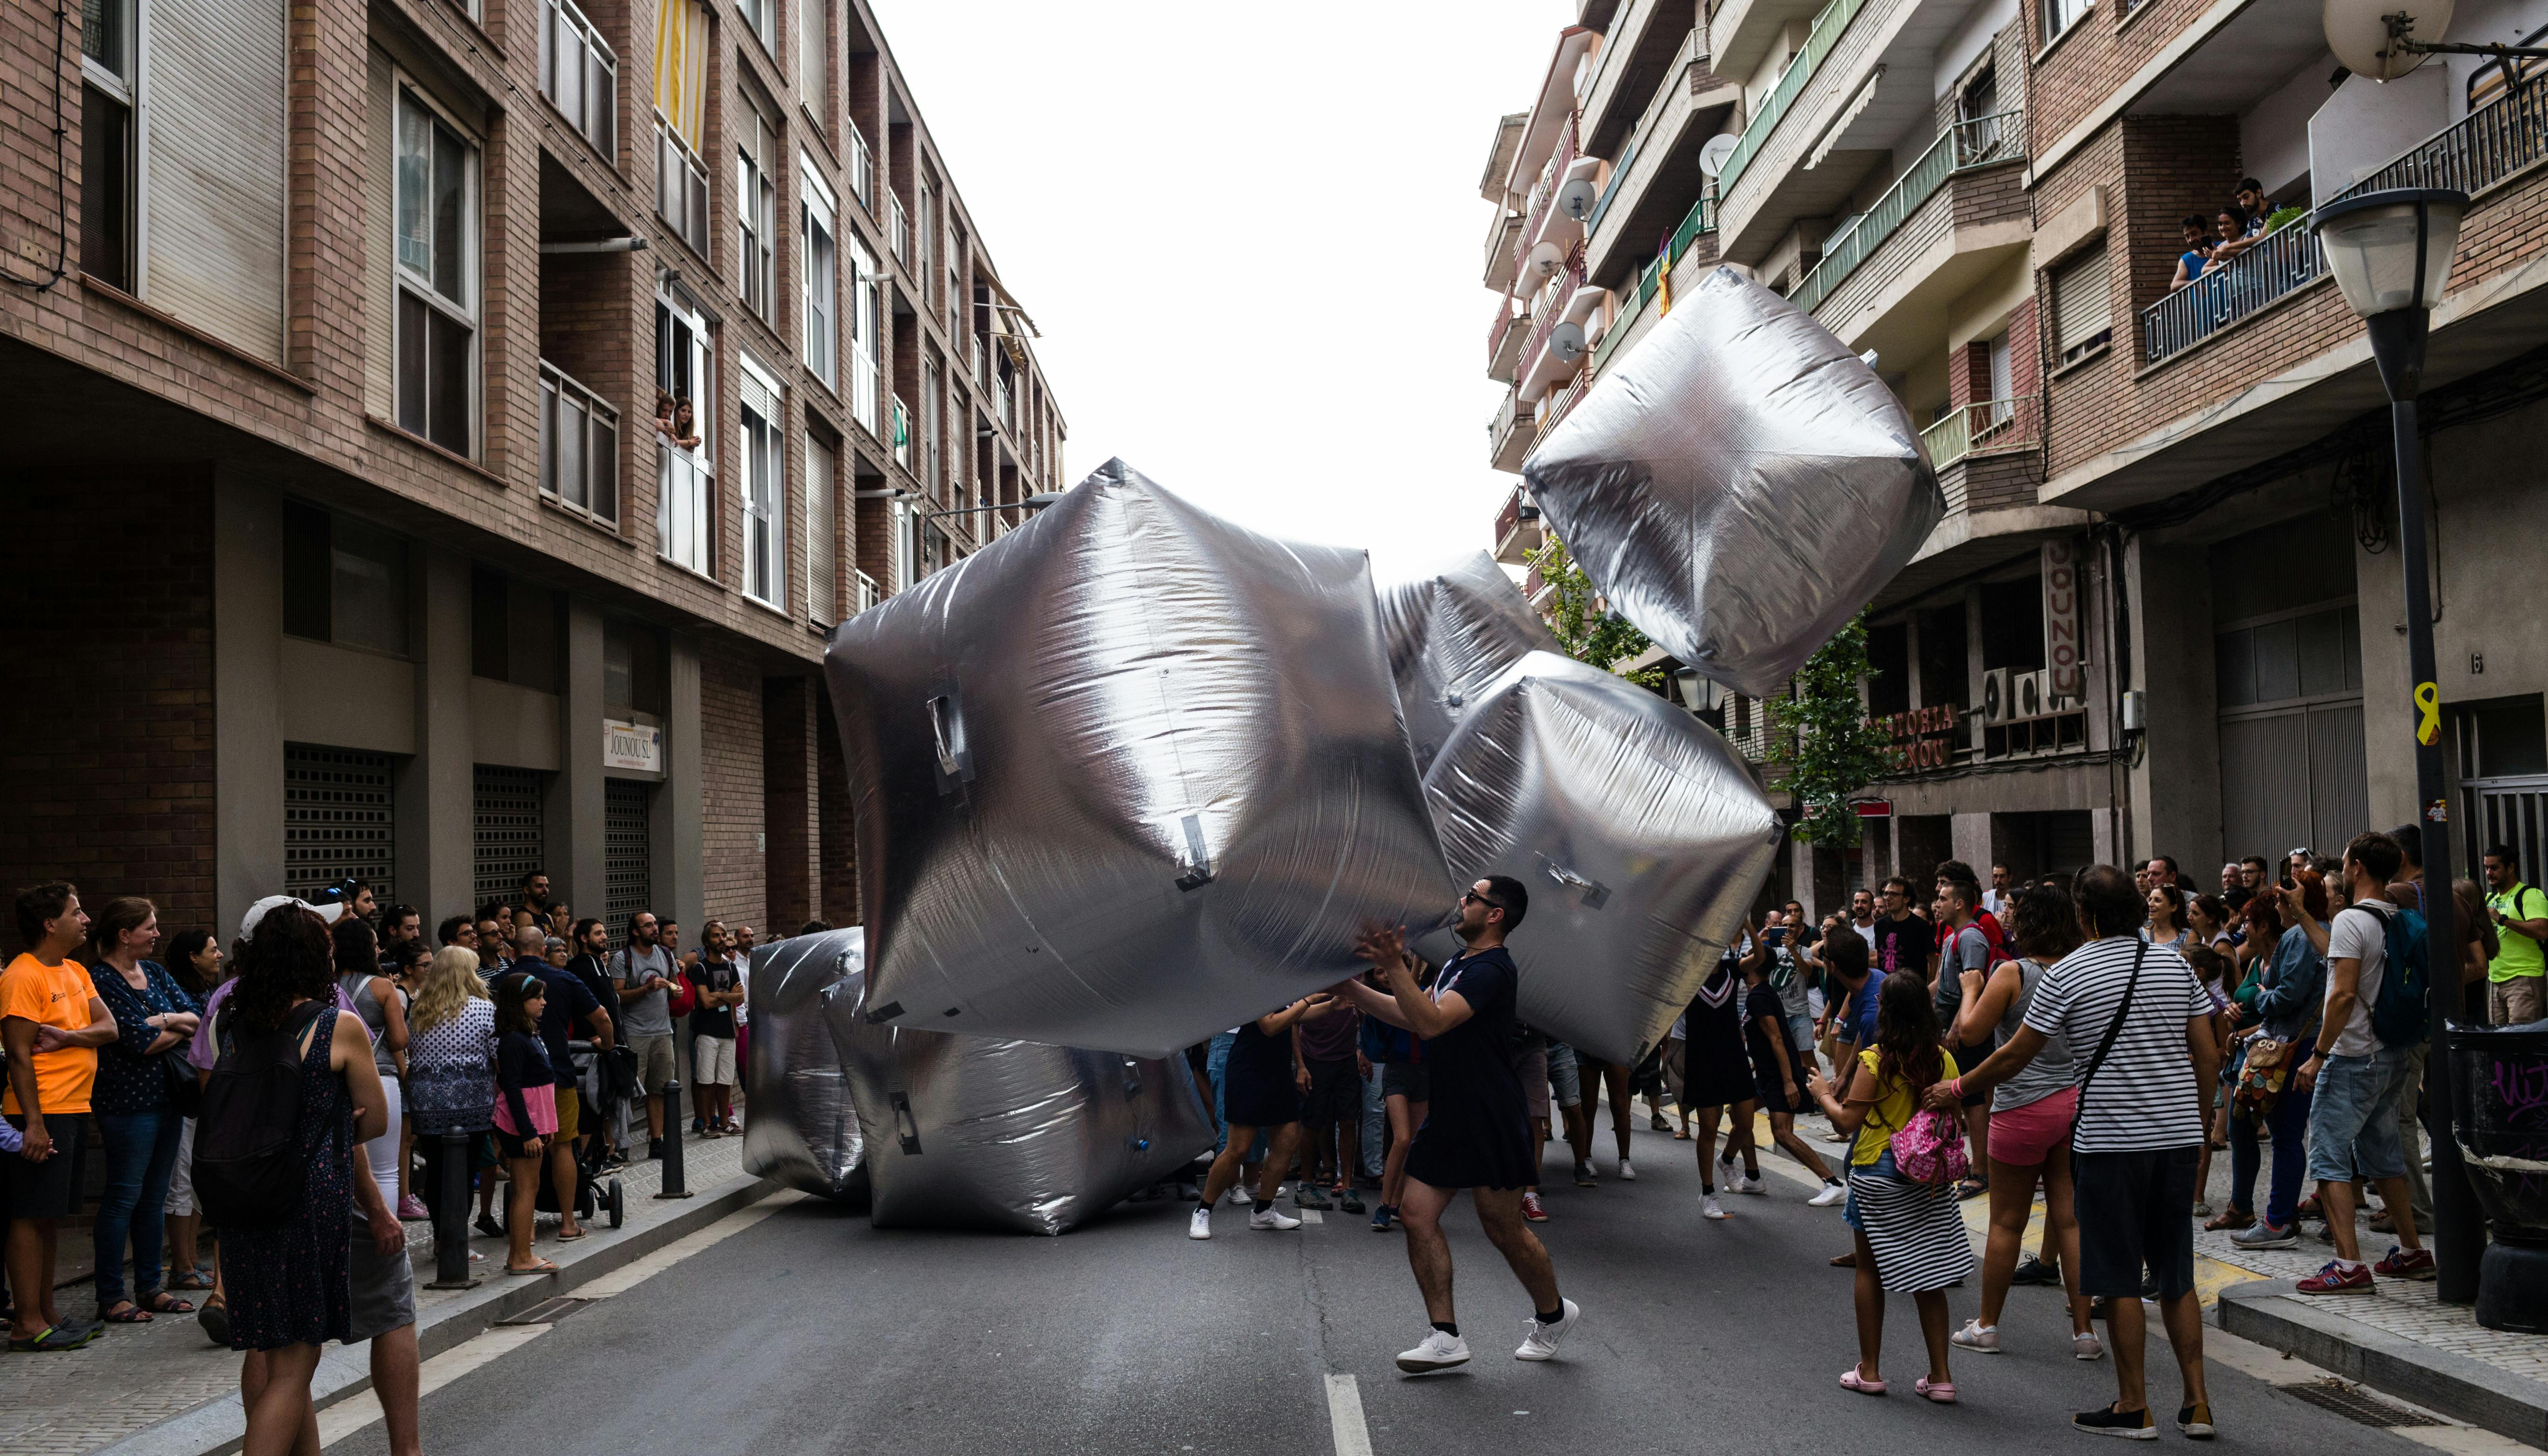 Dancers perform with inflatable silver cubes in the streets of the city